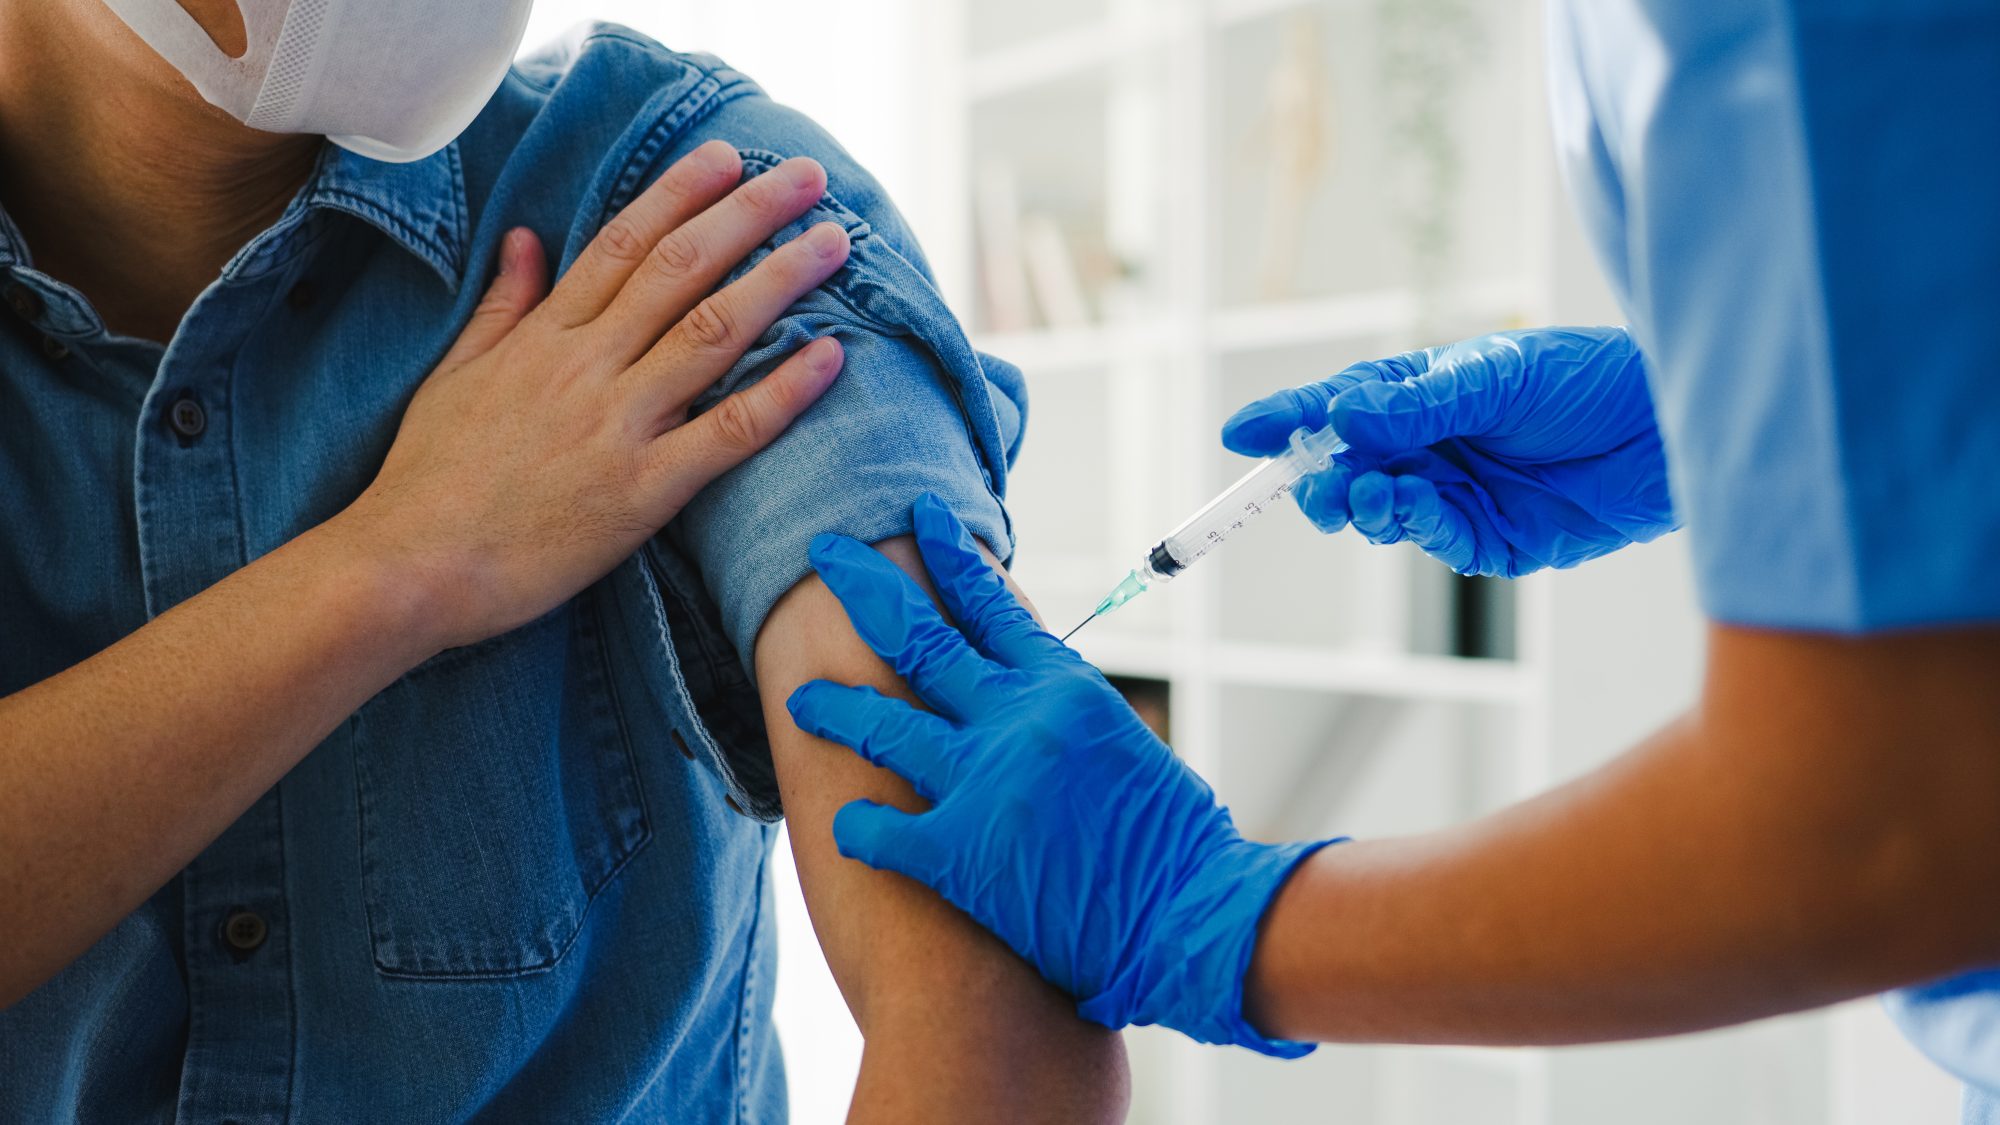 Patient holding rolled up sleeve while getting vaccinated